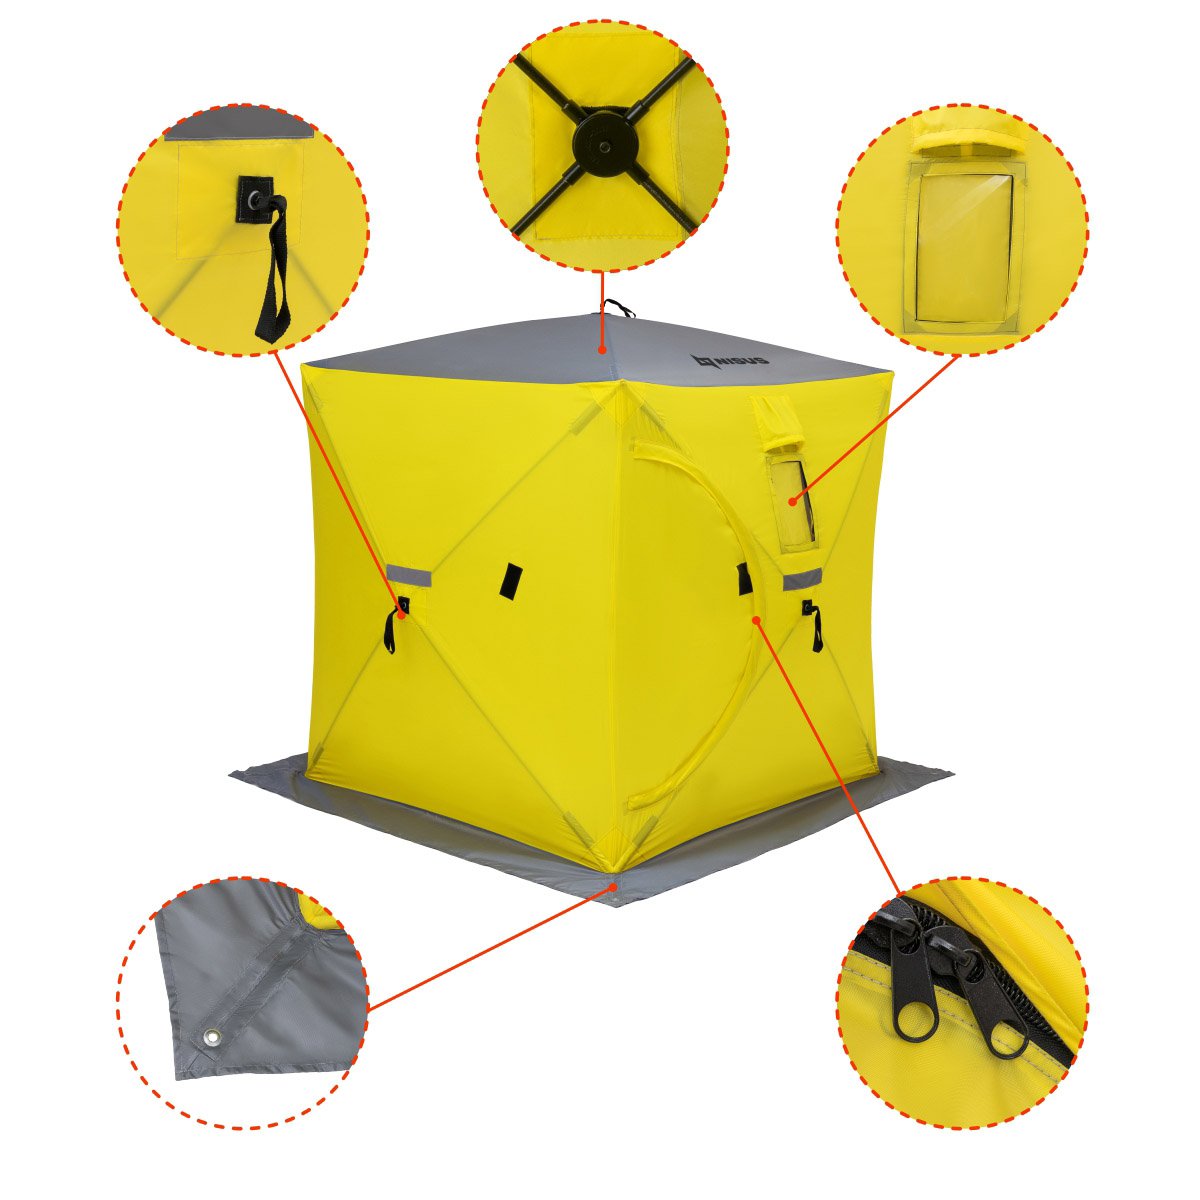 Cube Portable Ice Fishing 2 Person Shelter is equipped with an extra wide protective skirt with apertures for ice anchors to fix the shelter, windows for ventilation, solid fiberglass frameand zippers to widely open/close the shelter